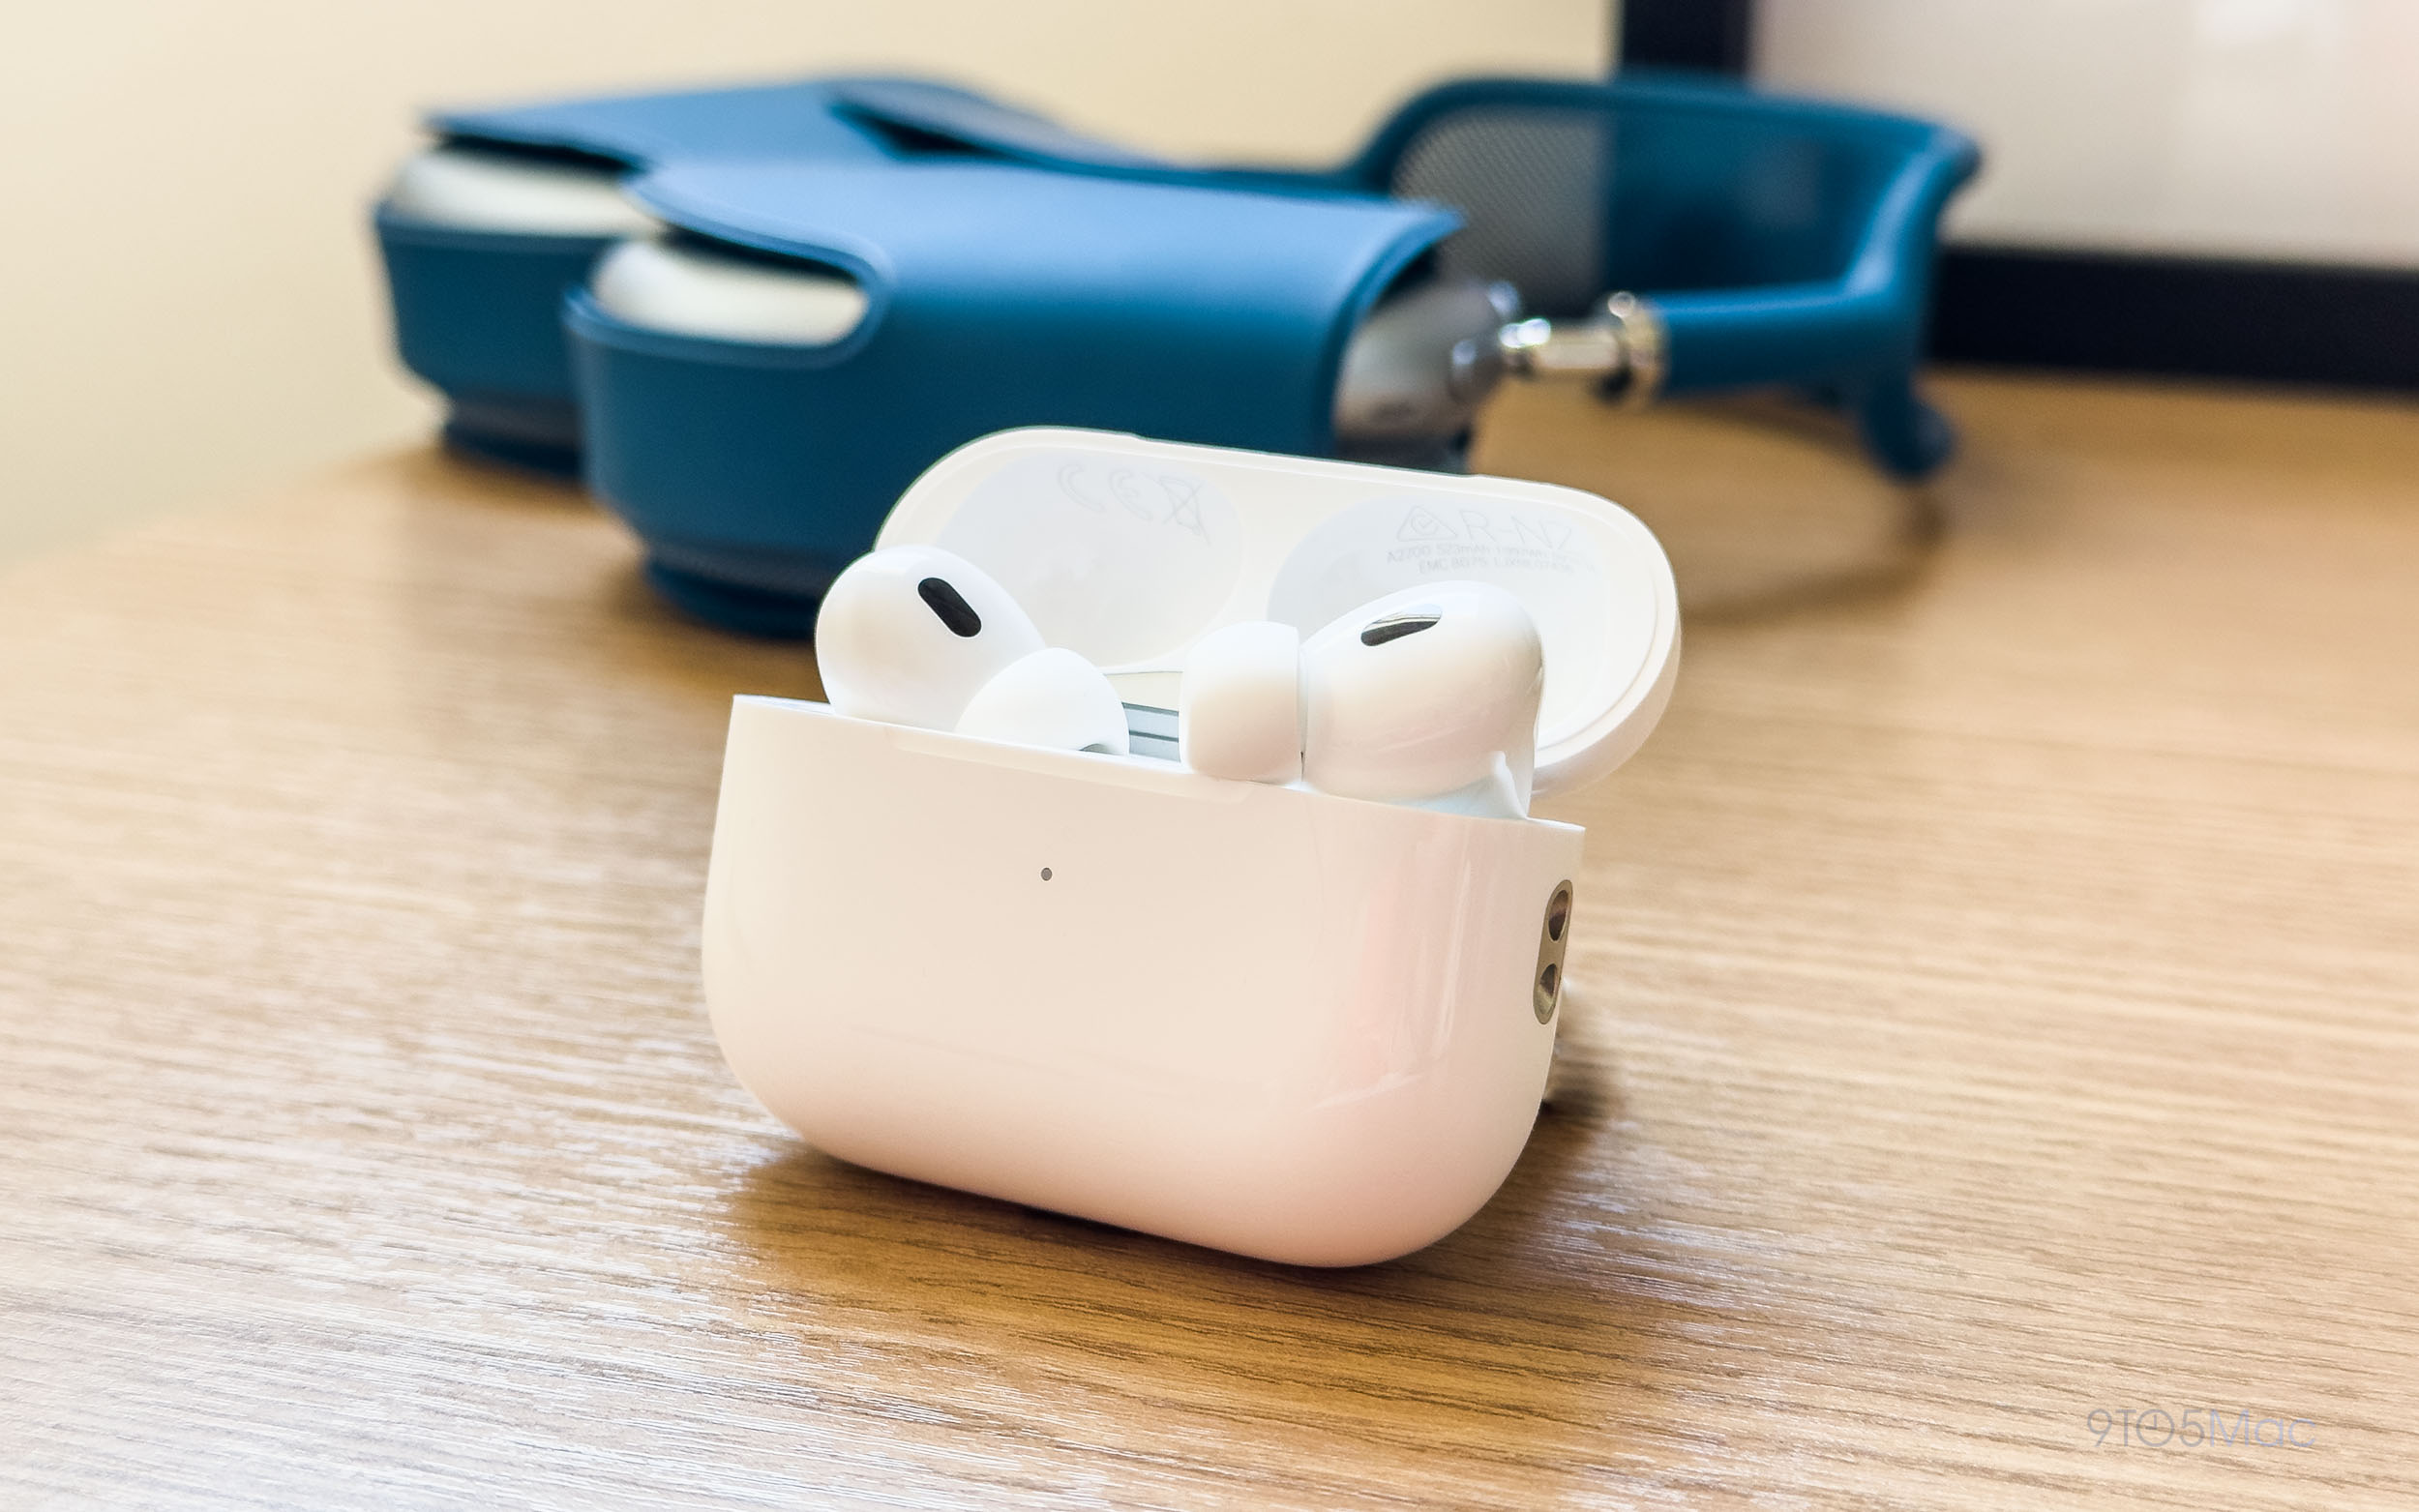 Apples bizarre advice if you cant update your AirPods firmware